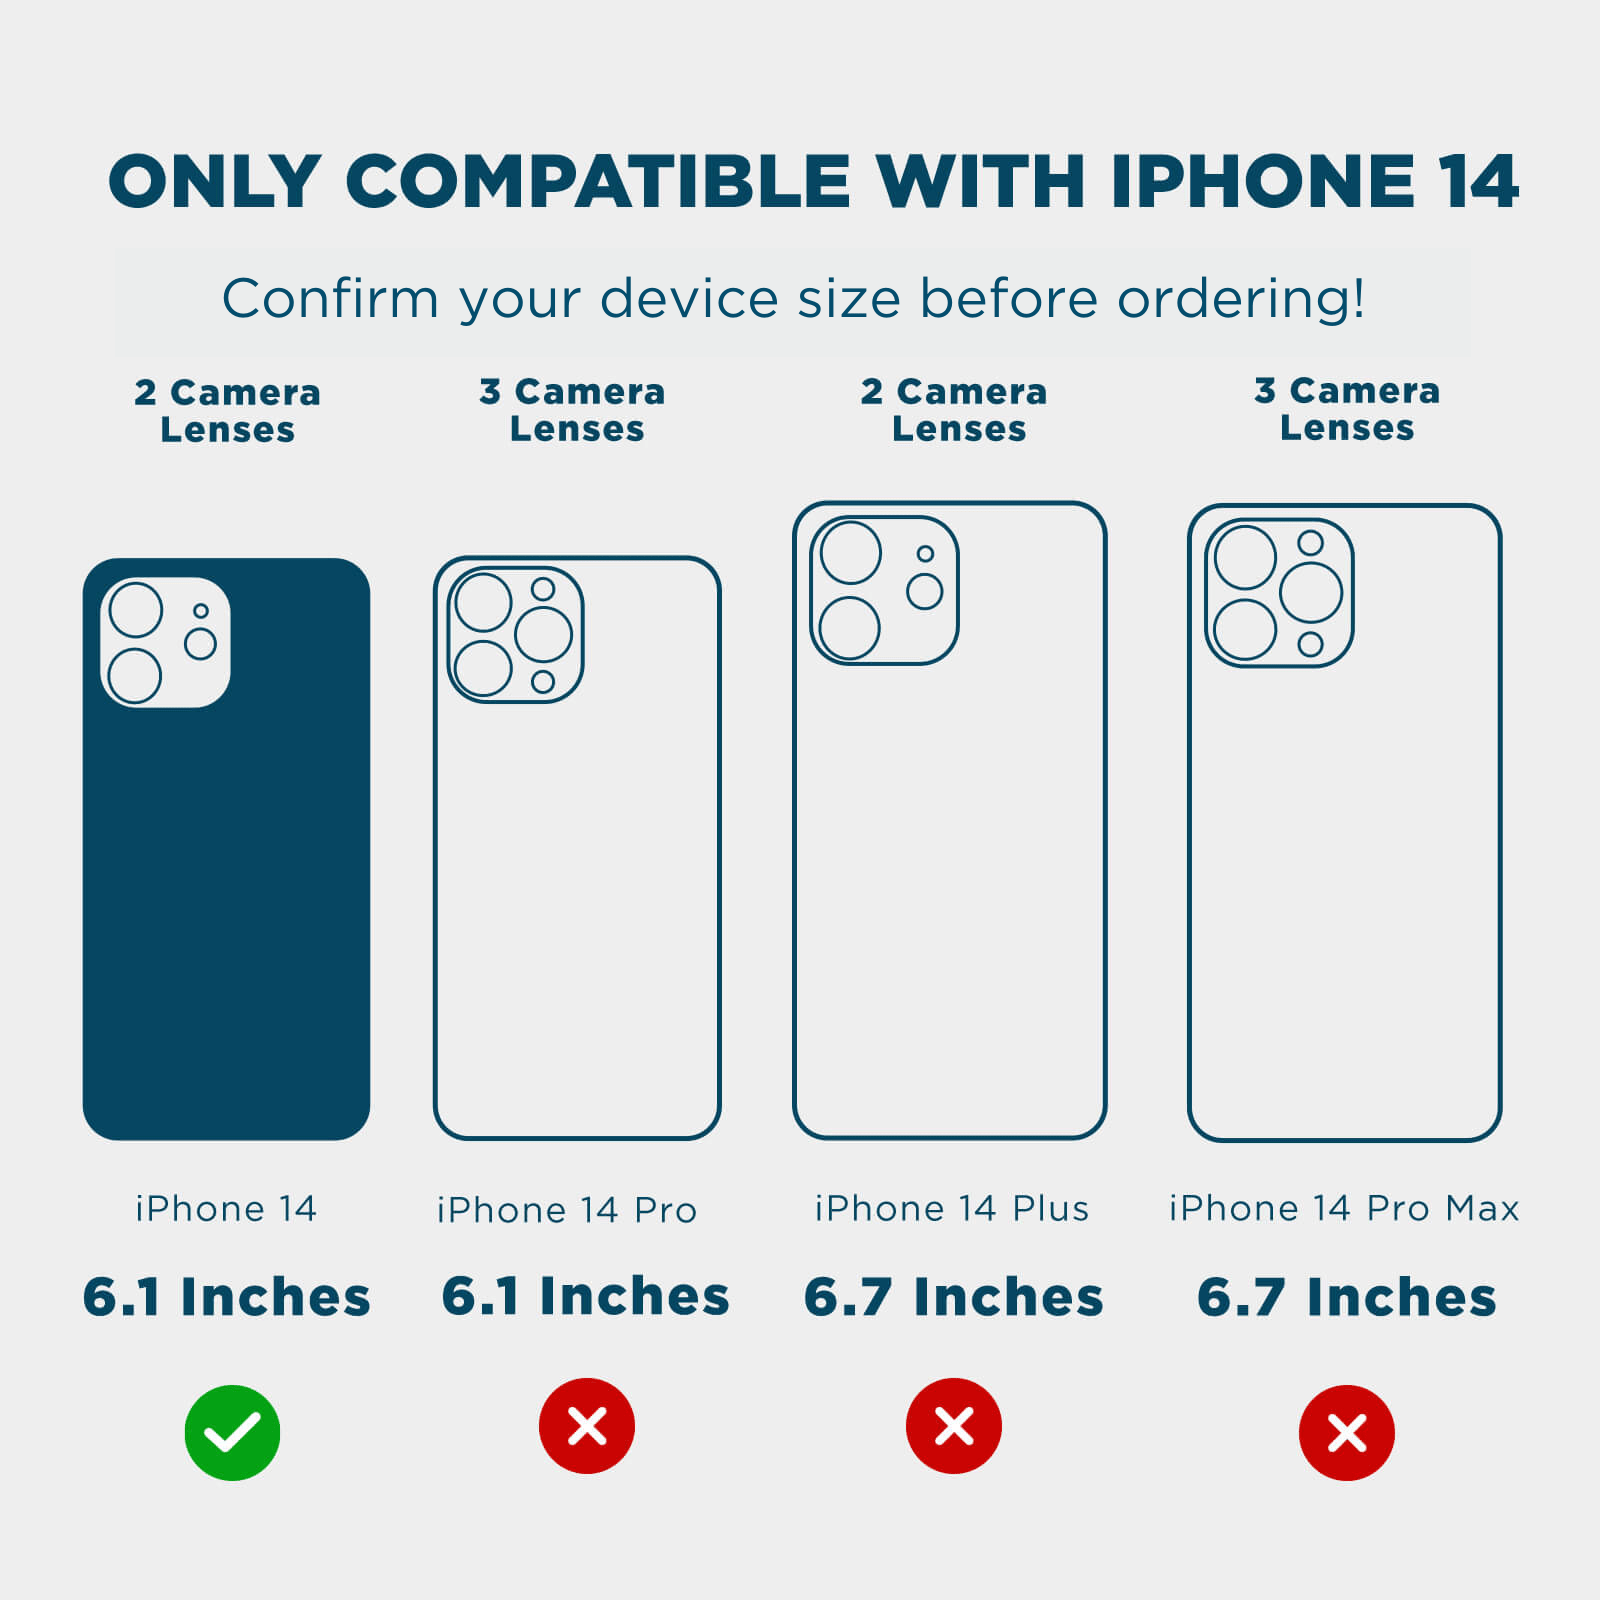 ONLY COMPATIBLE WITH IPHONE 14 CONFIRM YOUR DEVICE SIZE BEFORE ORDERING! 2 CAMERA LENSES, 3 CAMERA LENSES, 2 CAMERA LENSES, 3 CAMERA LENSES. IPHONE 14 6.1" IPHONE 14 PRO 6.1" IPHONE 14 PLUS 6.7" IPHONE 14 PRO MAX 6.7". COLOR::KARAT MARBLE